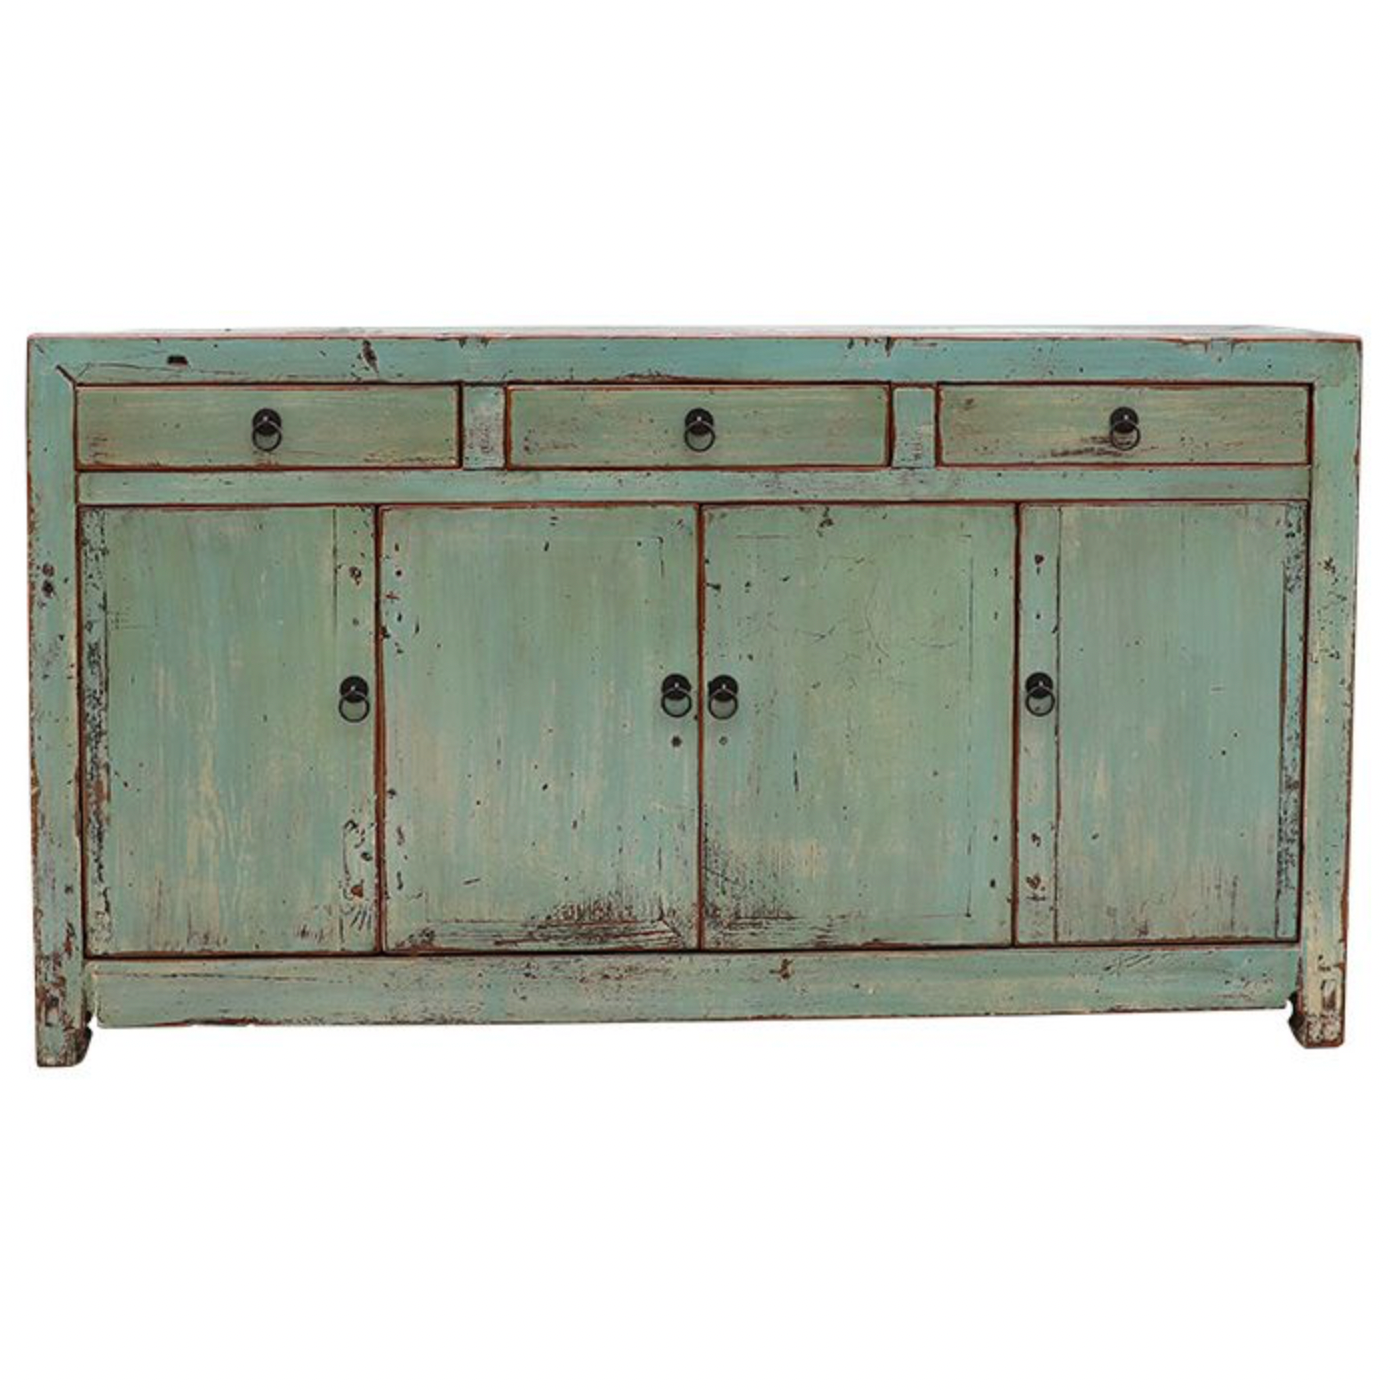 Vintage Cabinet in Faded Green, 62"L x 18"W x 35"D